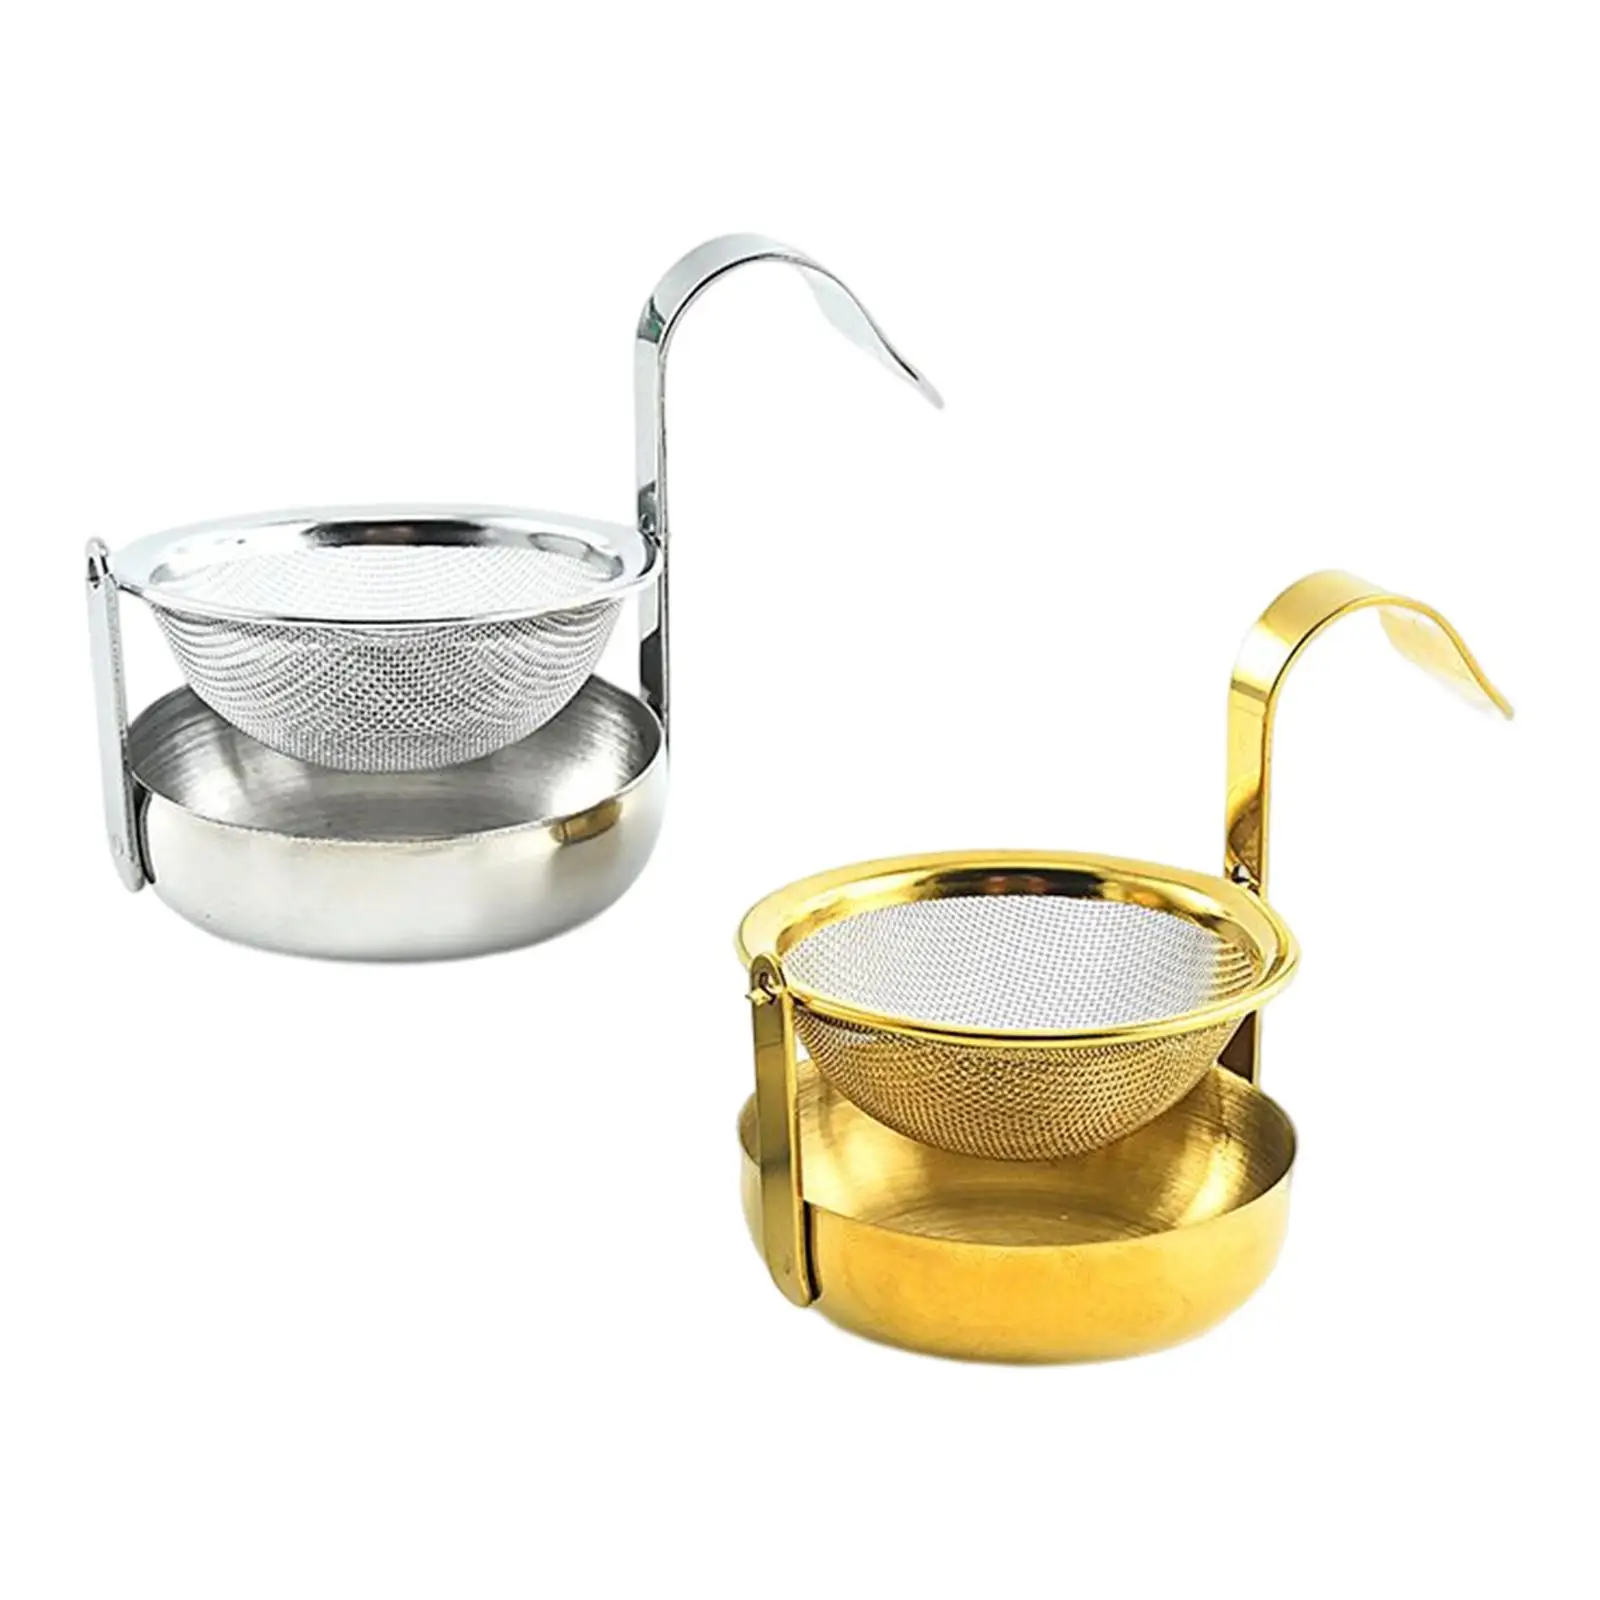 360 Rotatable Tea Strainer, Reusable 304 Stainless Steel Tea Accessories Fine Mesh Teaware for Party kitchen